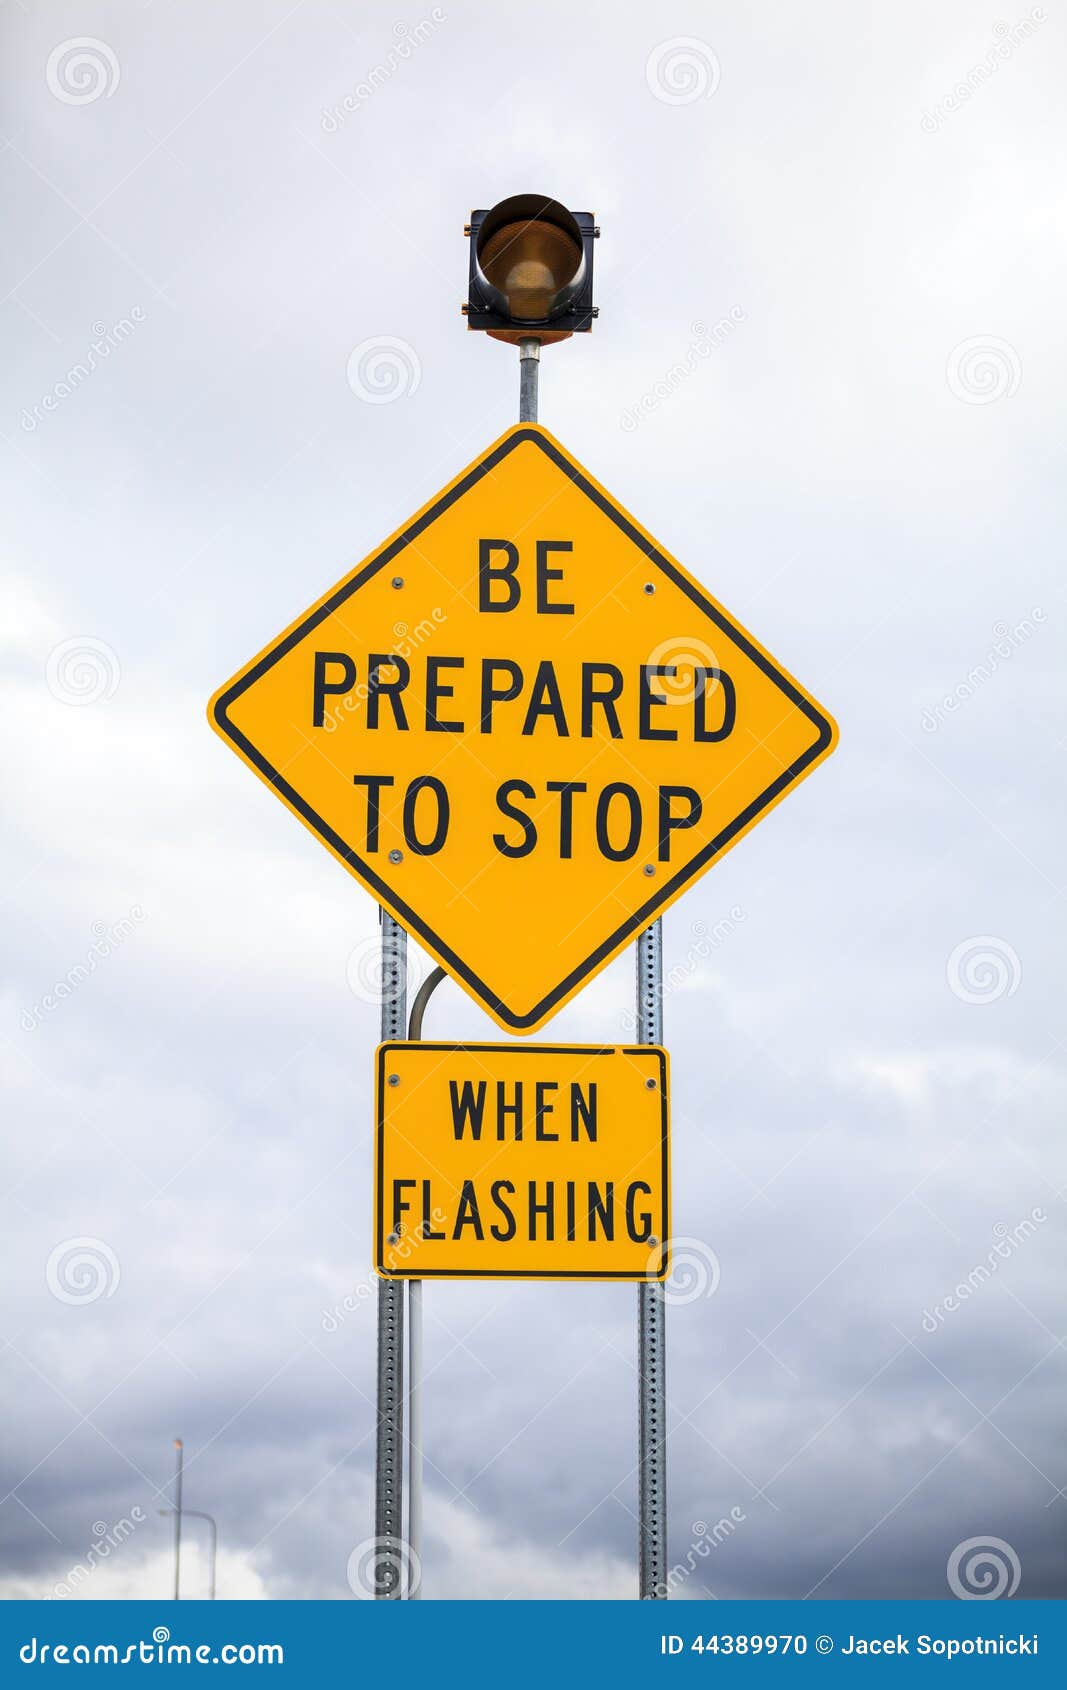 Be Prepared To Stop When Flashing Road Sign Stock Photo Image Of